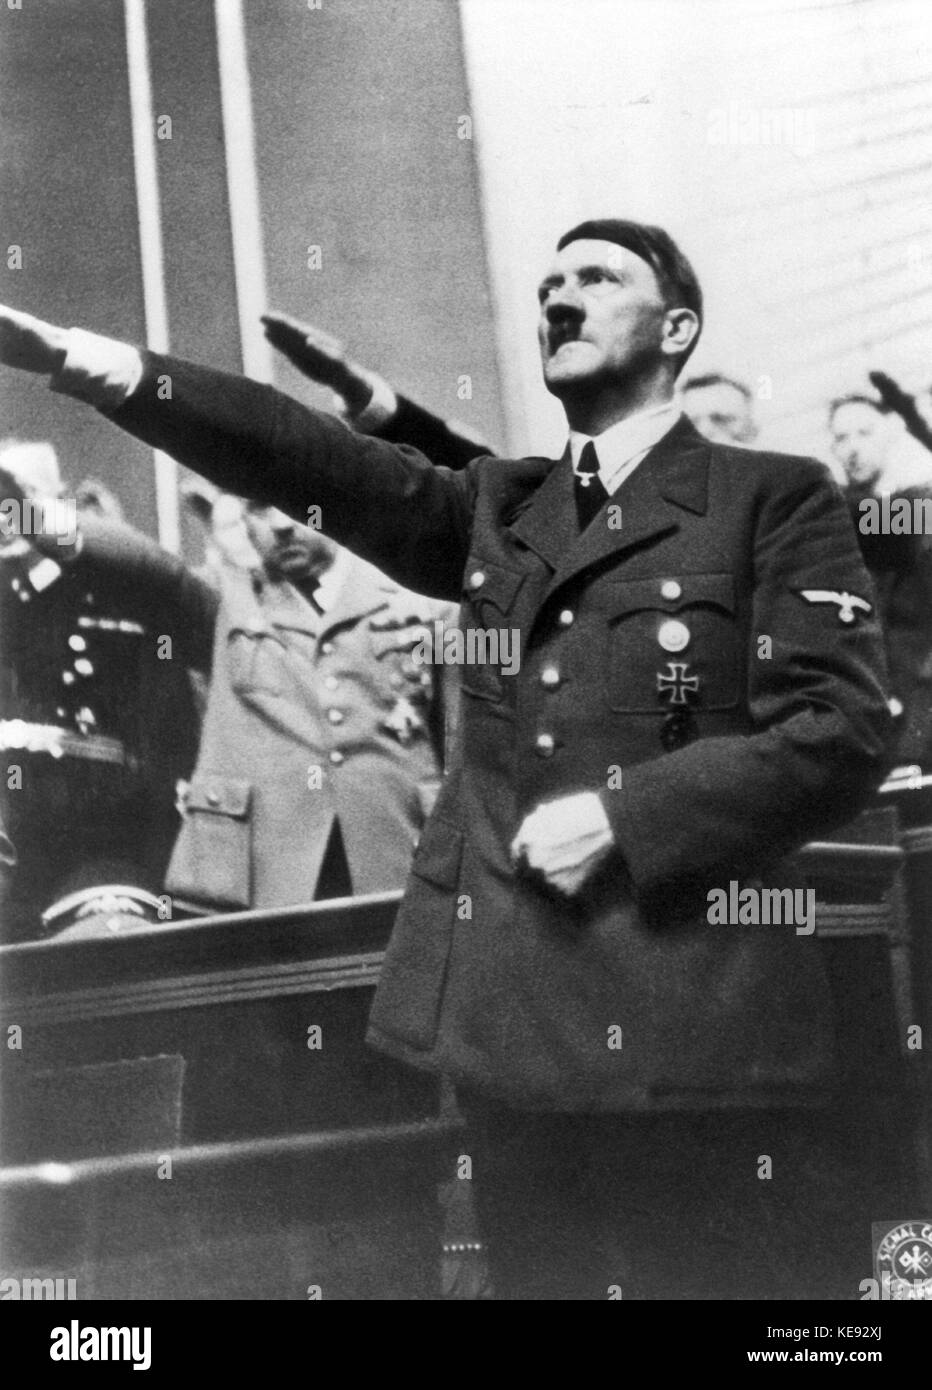 The Reich Chancellor and National Socialist leader Adolf Hitler shows Hitlergruß in the Berlin Reichstag during the Second World War. | usage worldwide Stock Photo